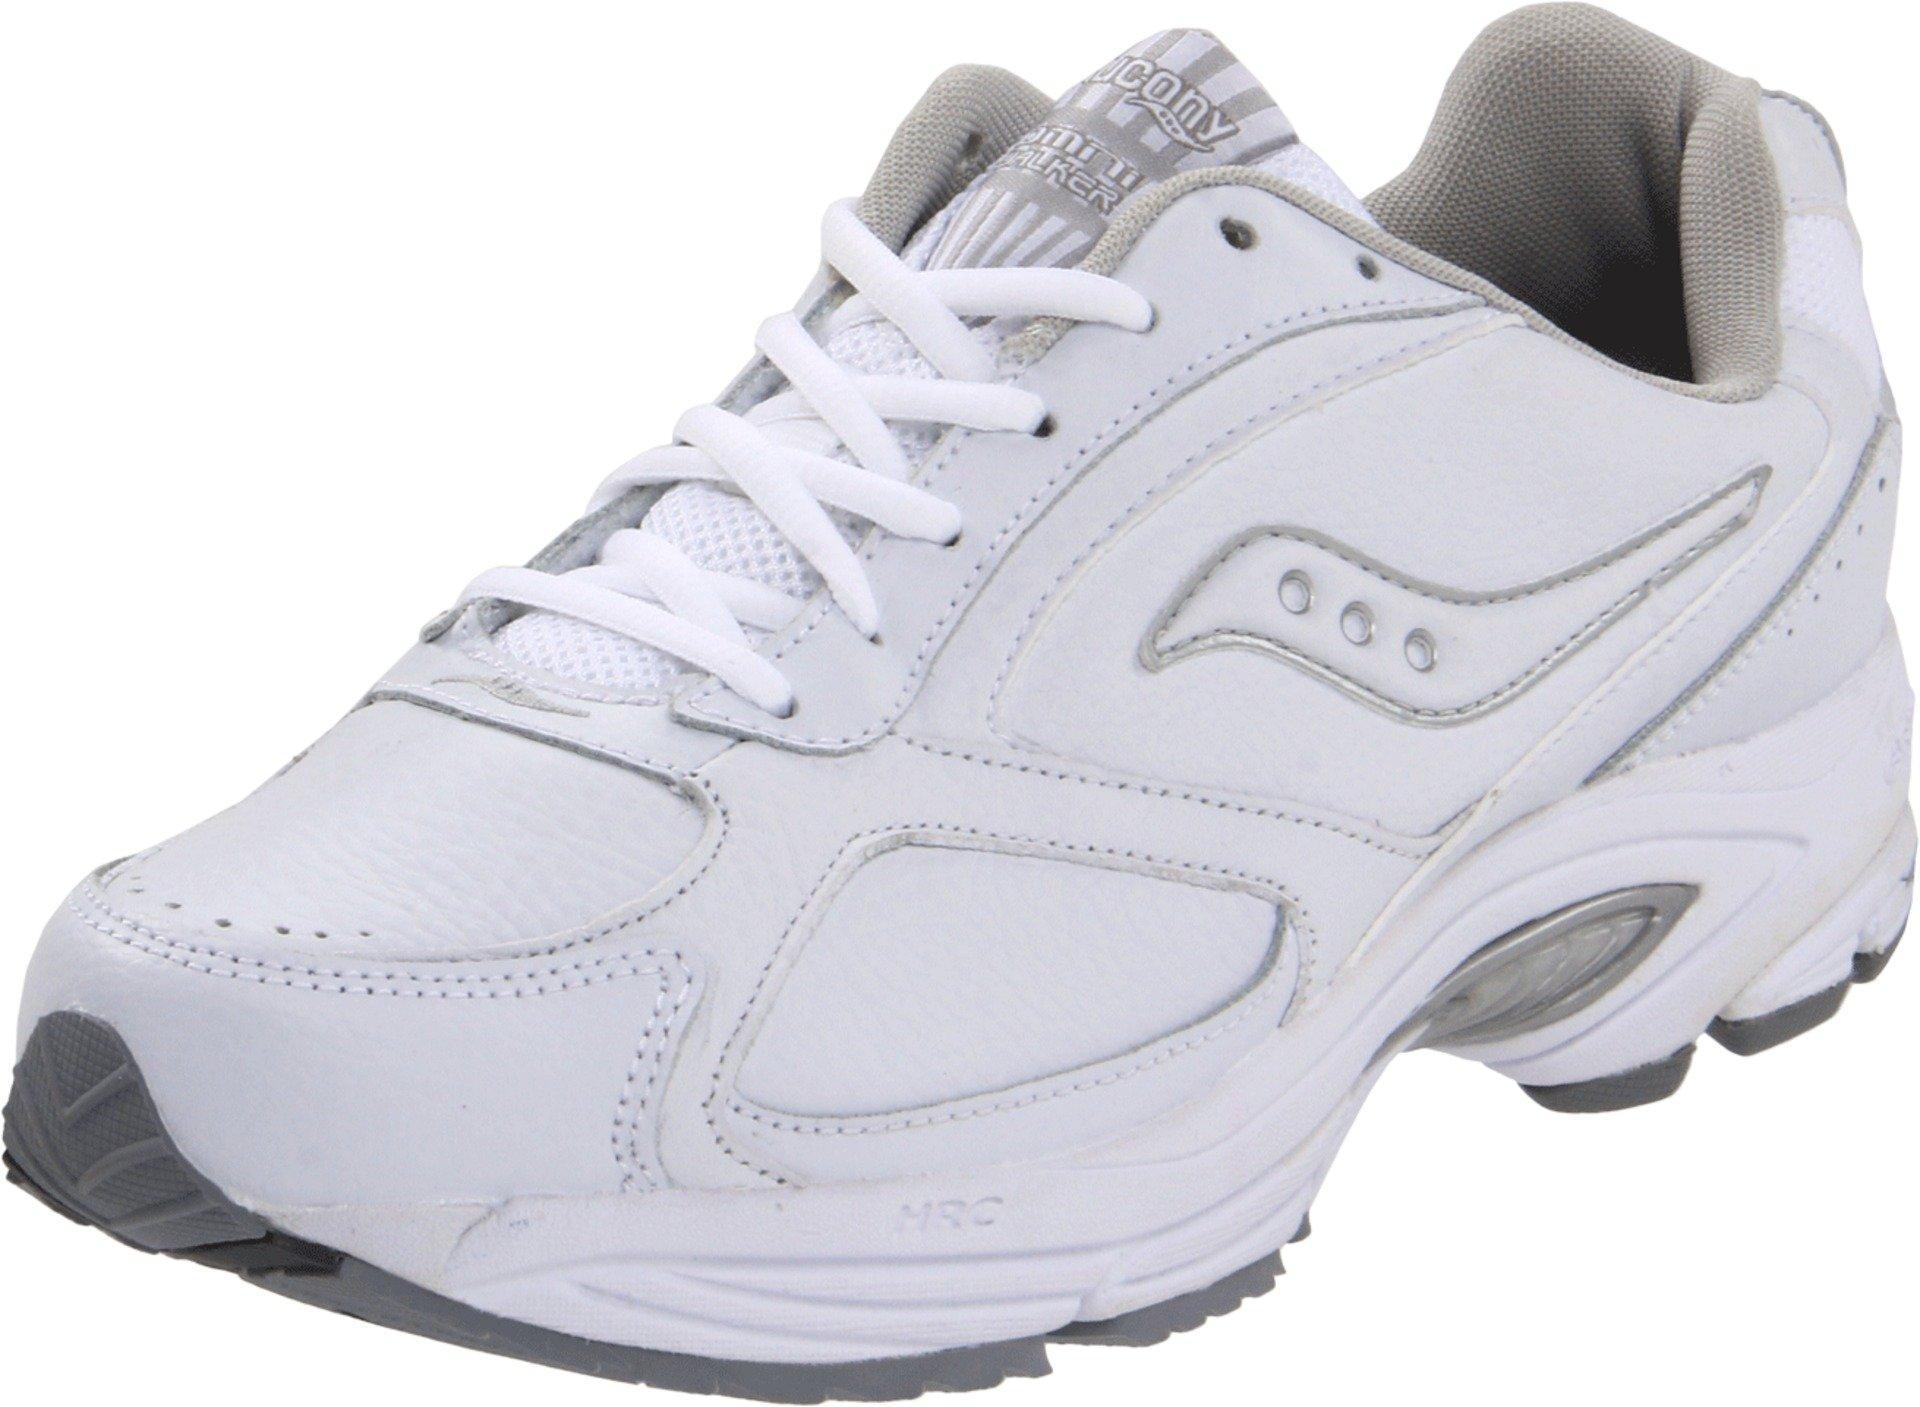 Saucony Leather Grid(r) Omni Walker in White for Men - Lyst